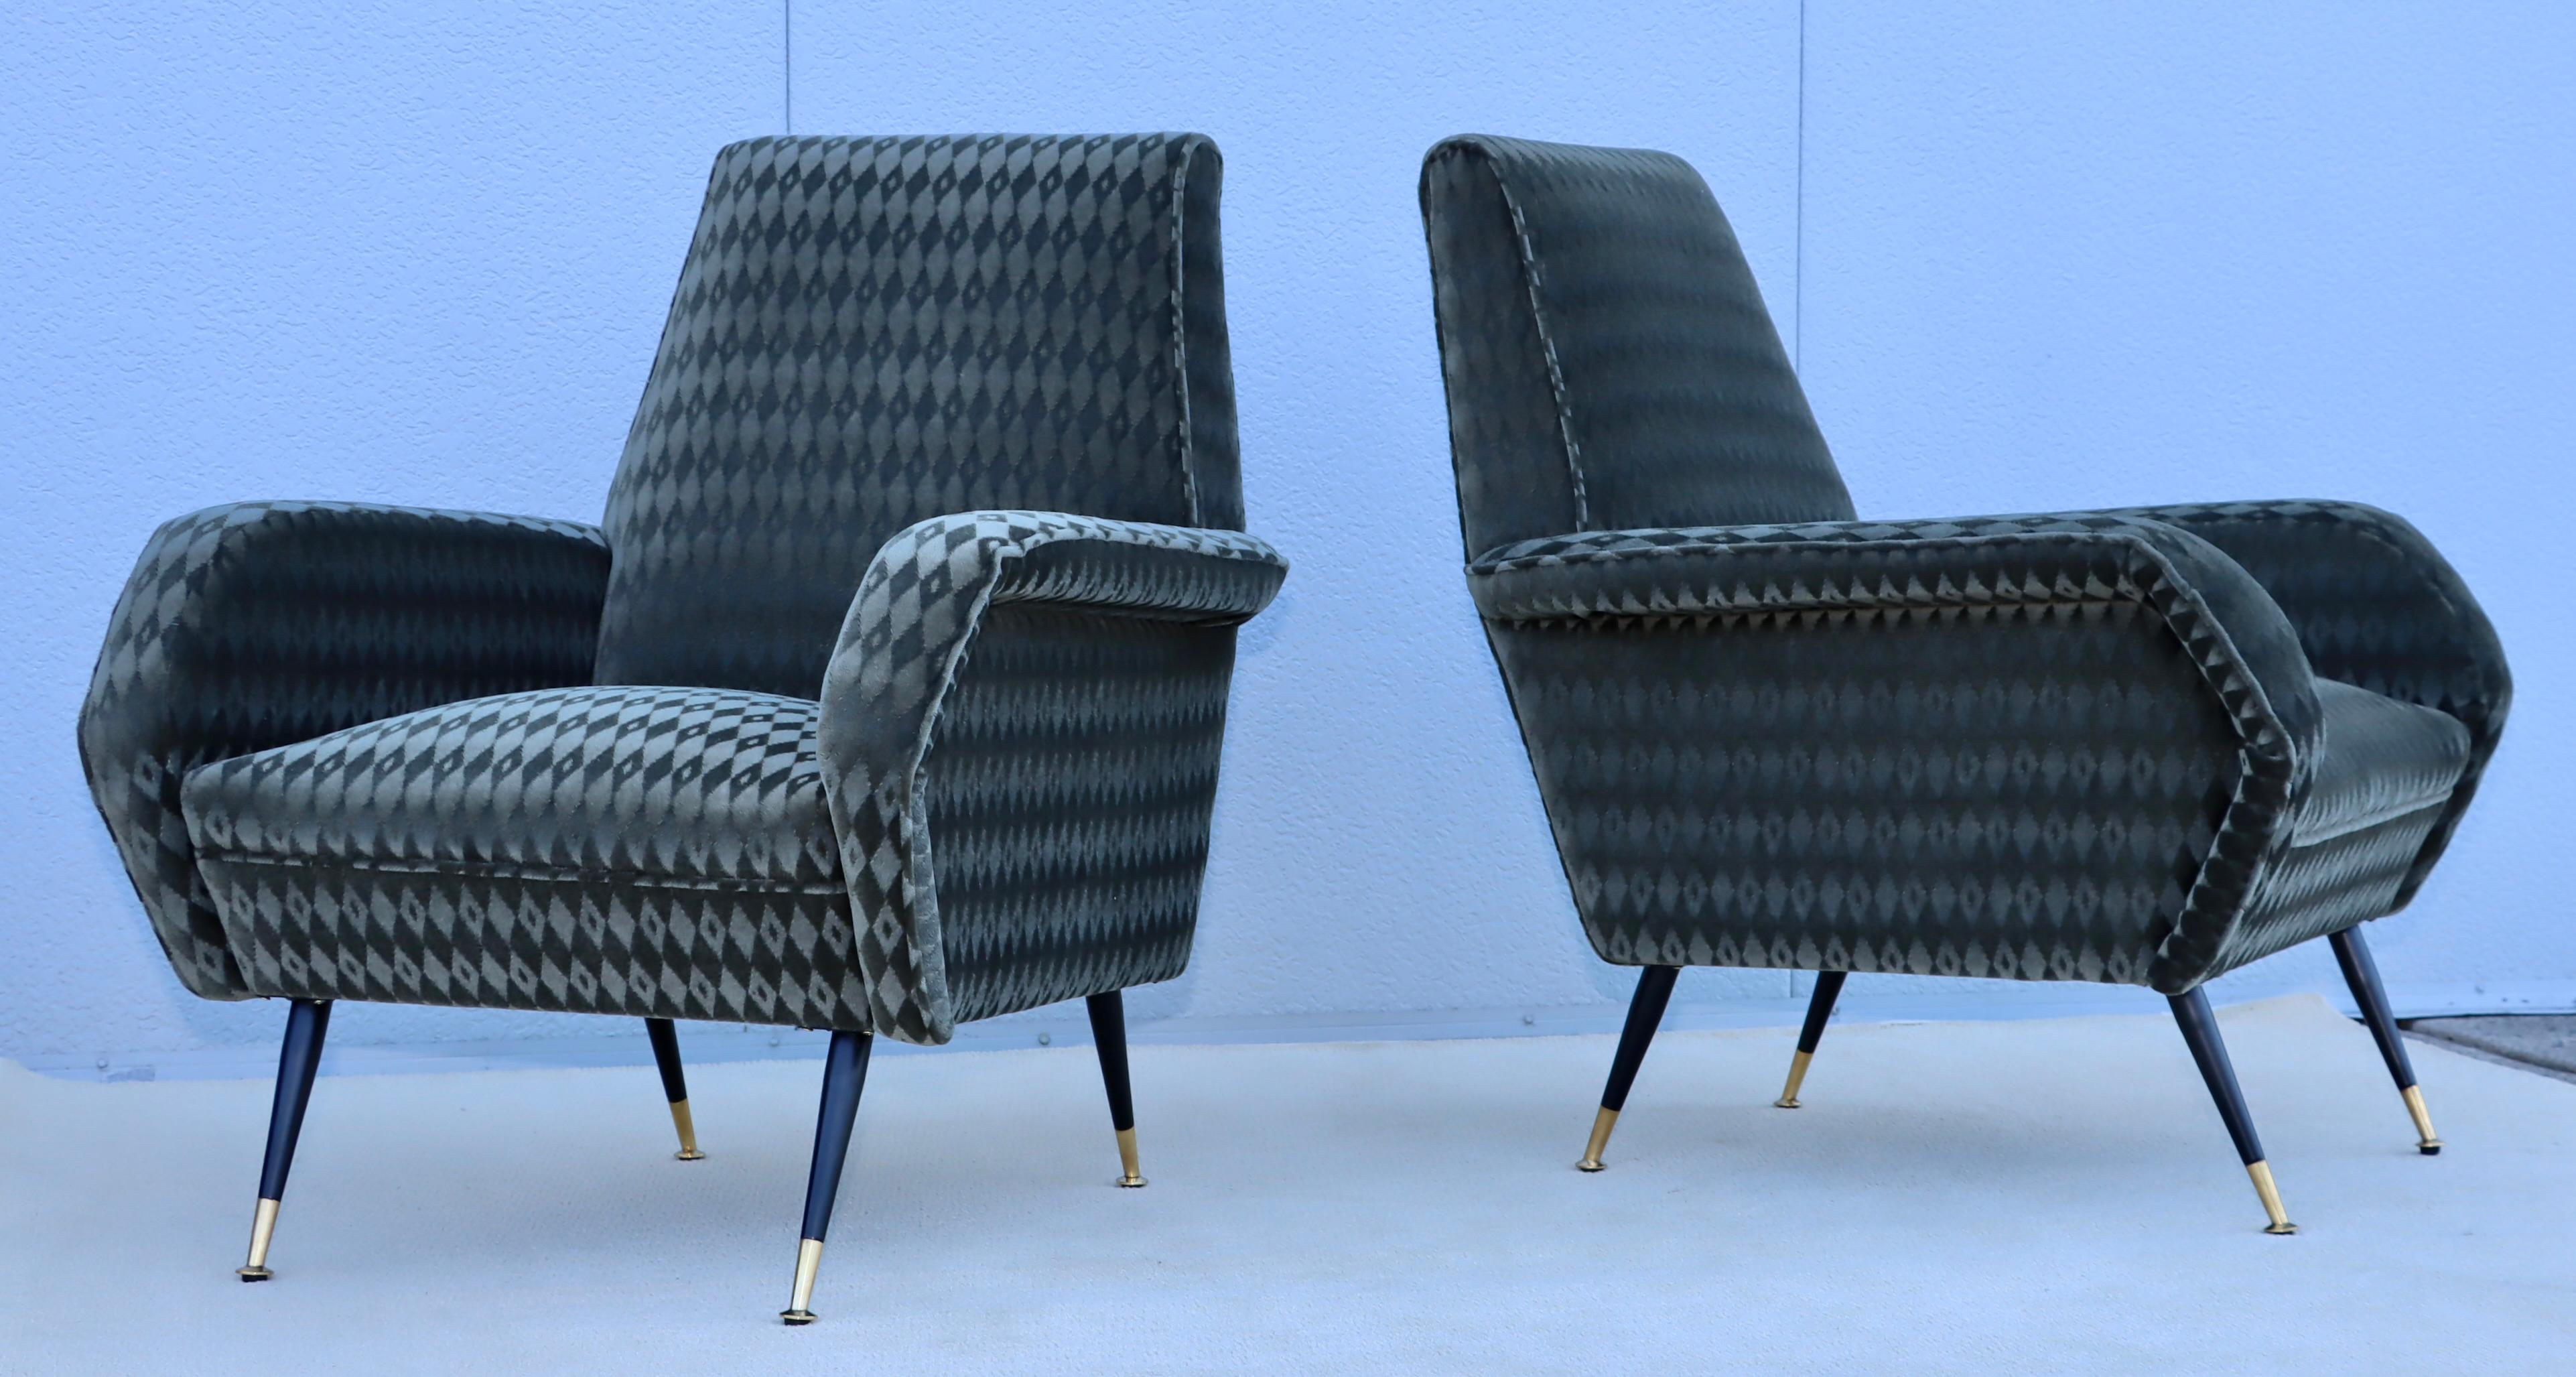 1950's Mid-Century Modern Italian Lounge Chairs With Donghia Mohair Upholstery For Sale 4